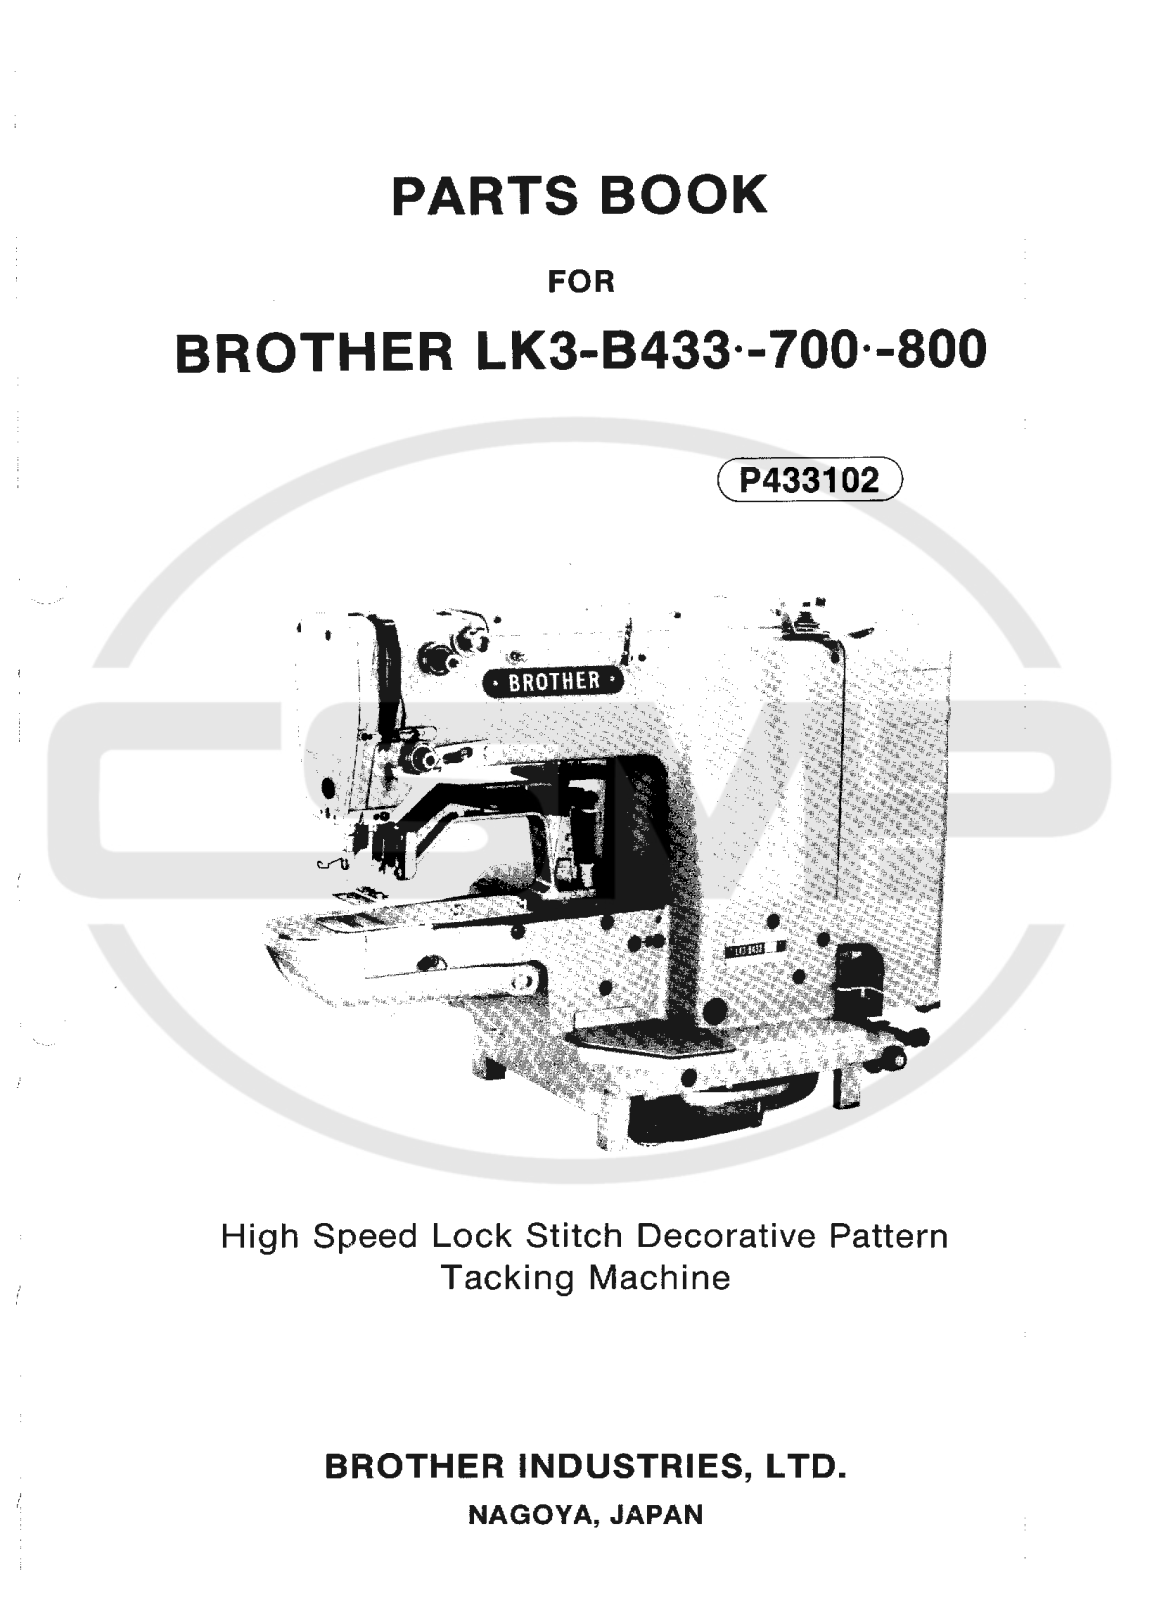 Brother LK3 B433 Parts Book